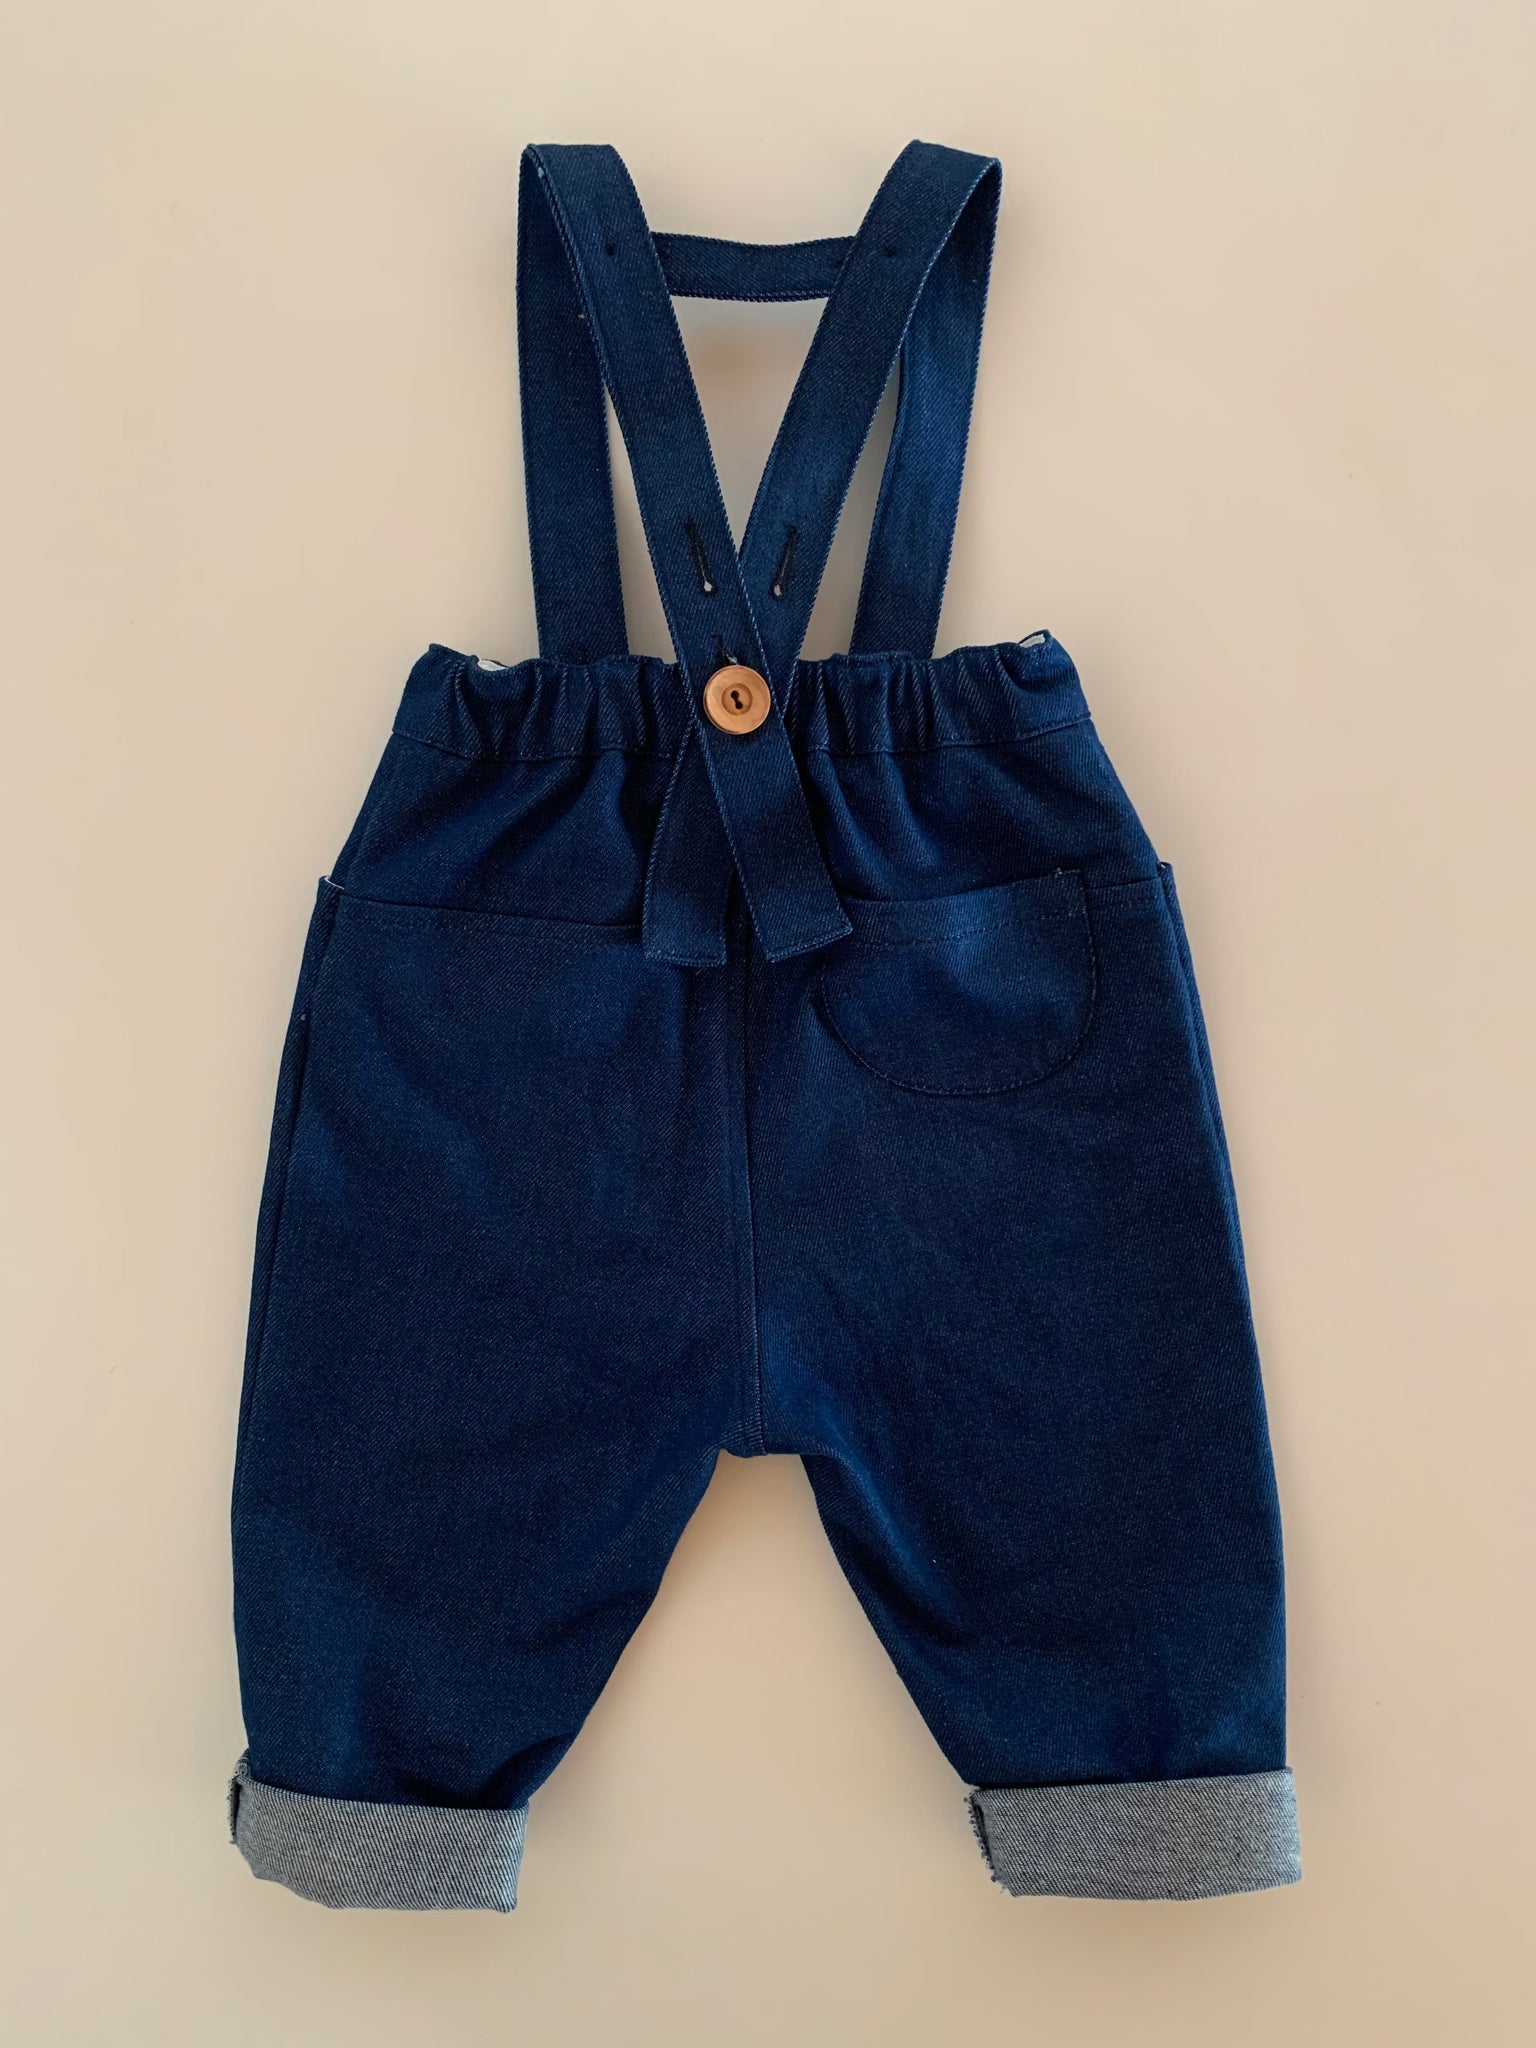 Hello Lupo Blue Denim Jeans With Removable  Overall Straps, Tie Waist, Front And Back Pockets.